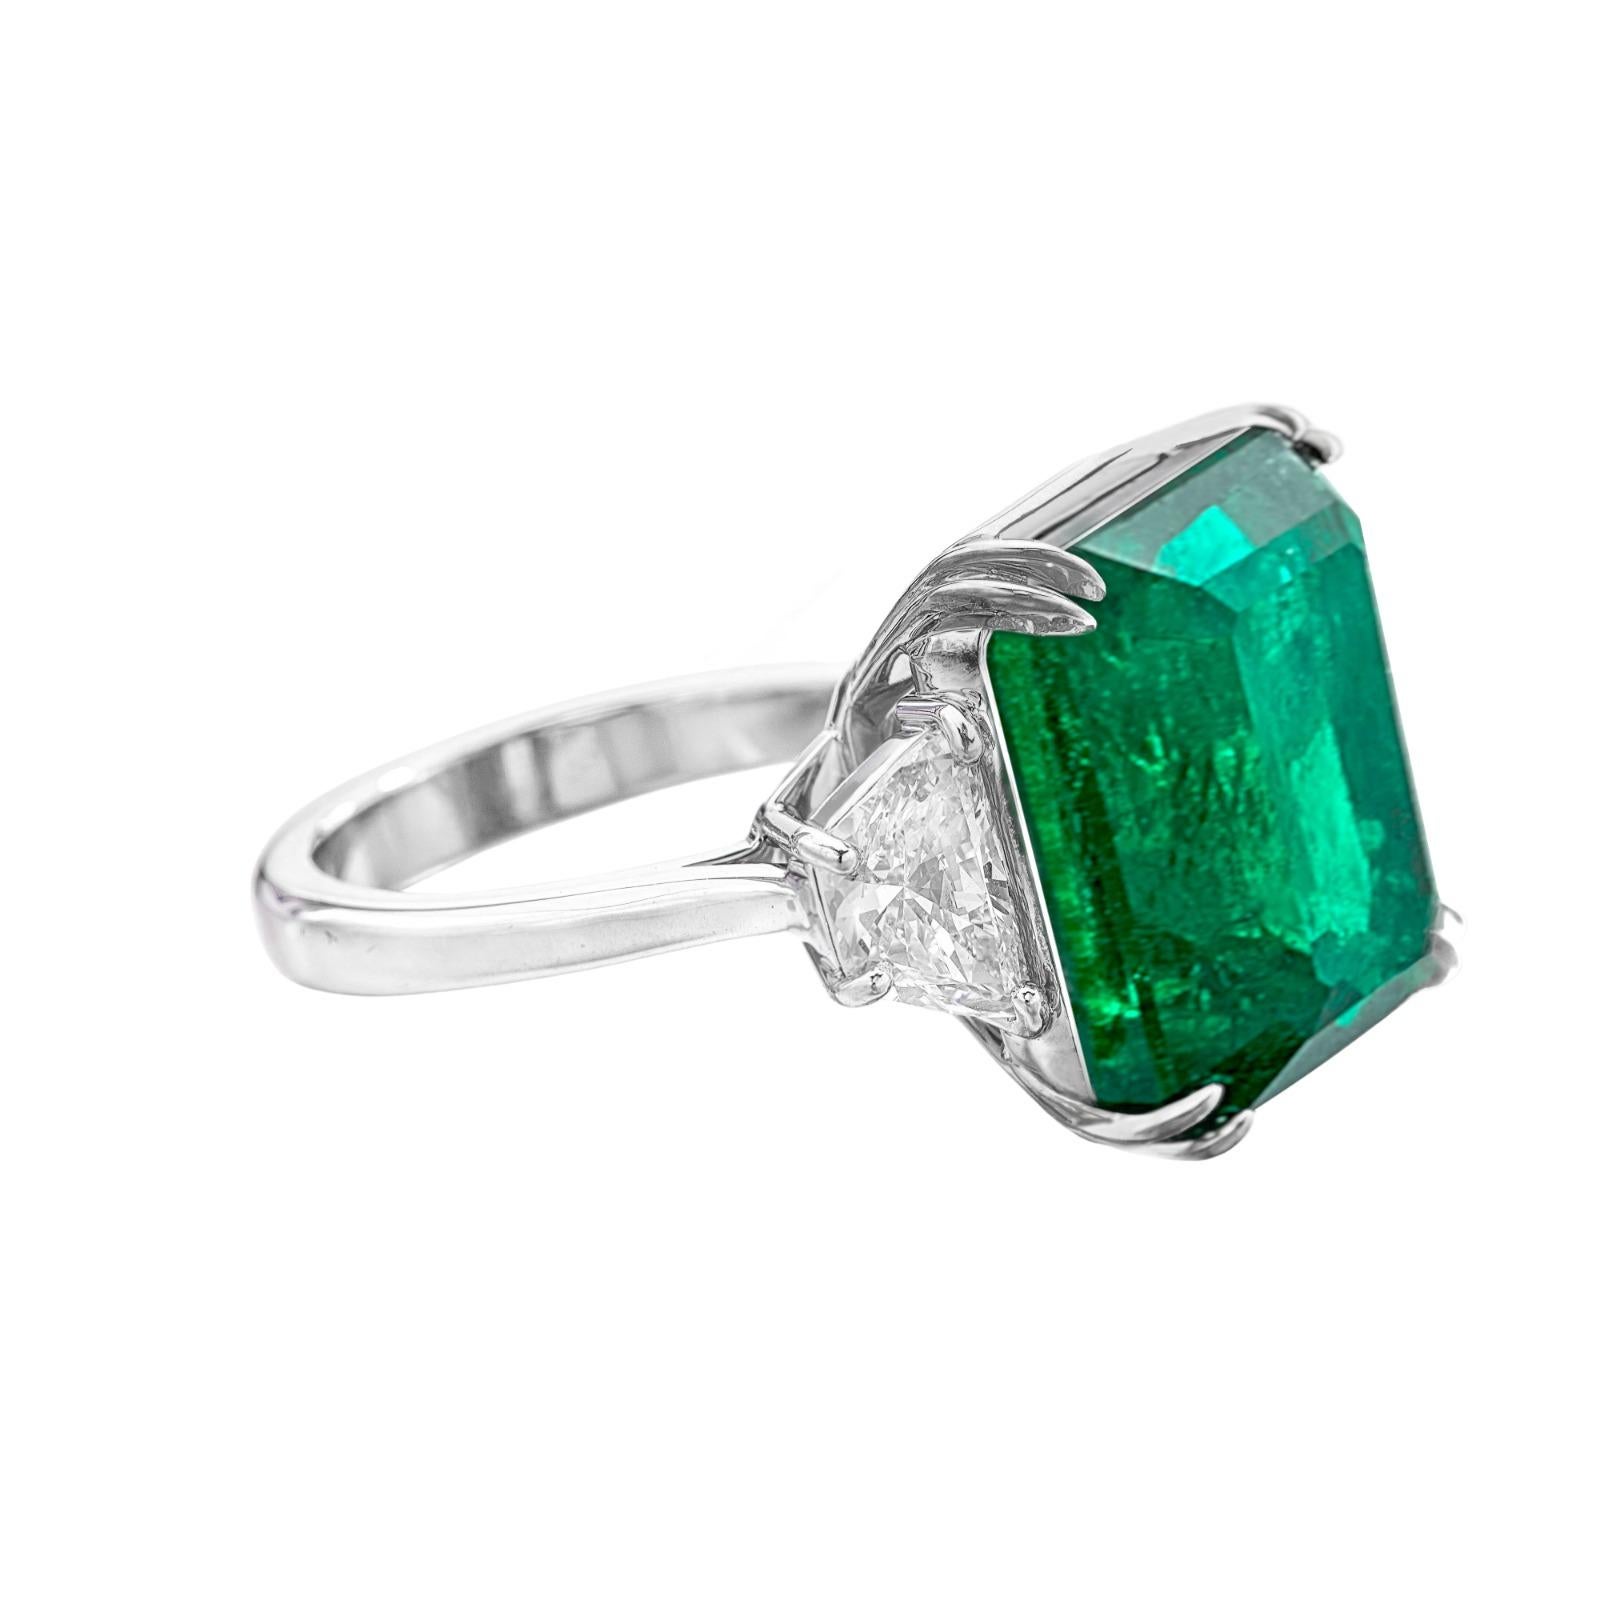 An exquisite and very large 10 carat green emerald set with two side trapezoid diamonds with a total weight of 1 carats 

the side diamonds are very high quality as well F color VS/VVS clarity

the ring has been set in solid 18 carats white